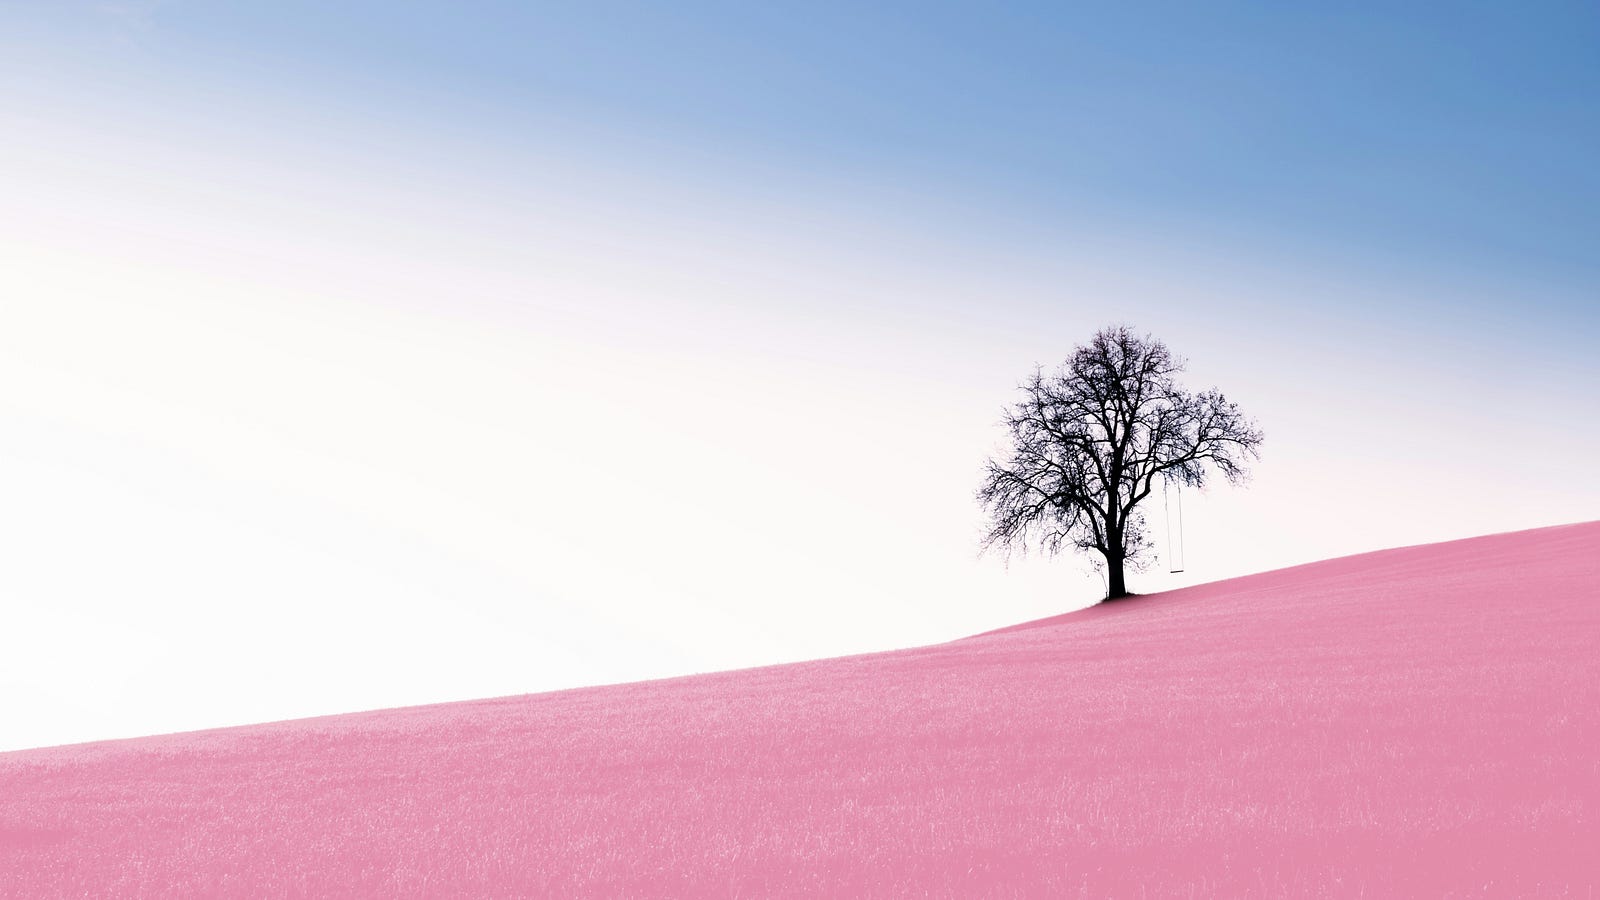 A hill, colored in pink, with a lone leafless tree.